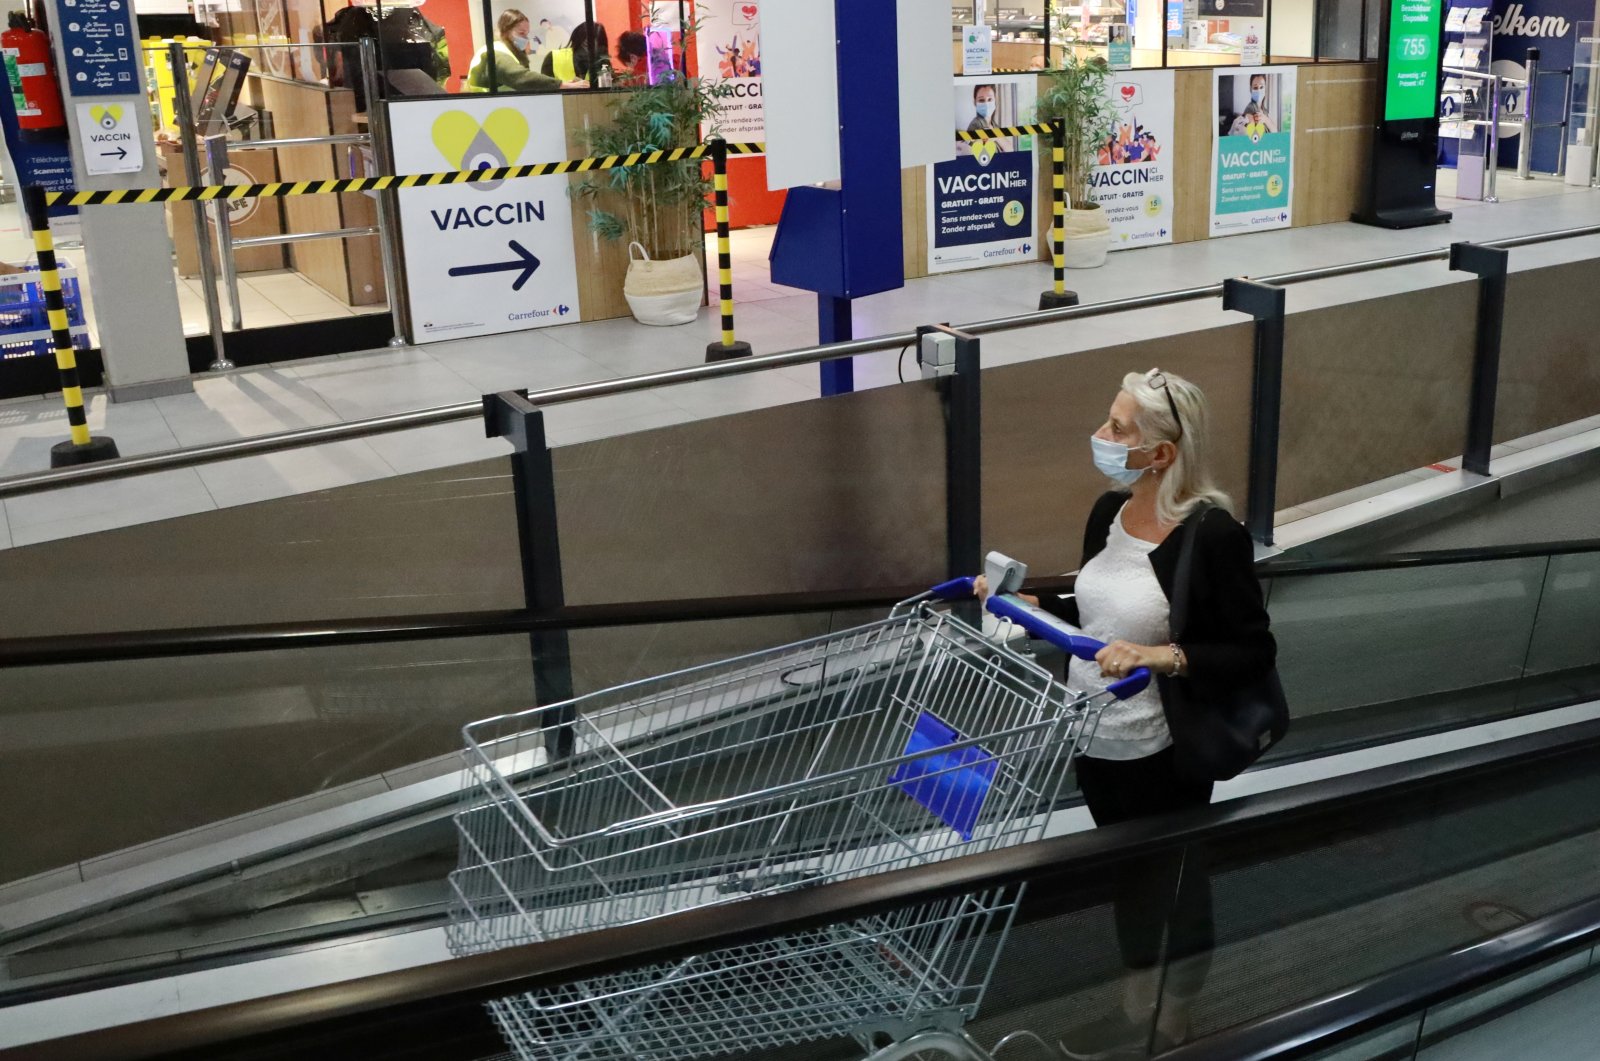 A woman pushes a shopping trolley past a sign for a COVID-19 vaccination center installed inside a supermarket in Brussels, Belgium, Aug. 30, 2021. (Reuters Photo)